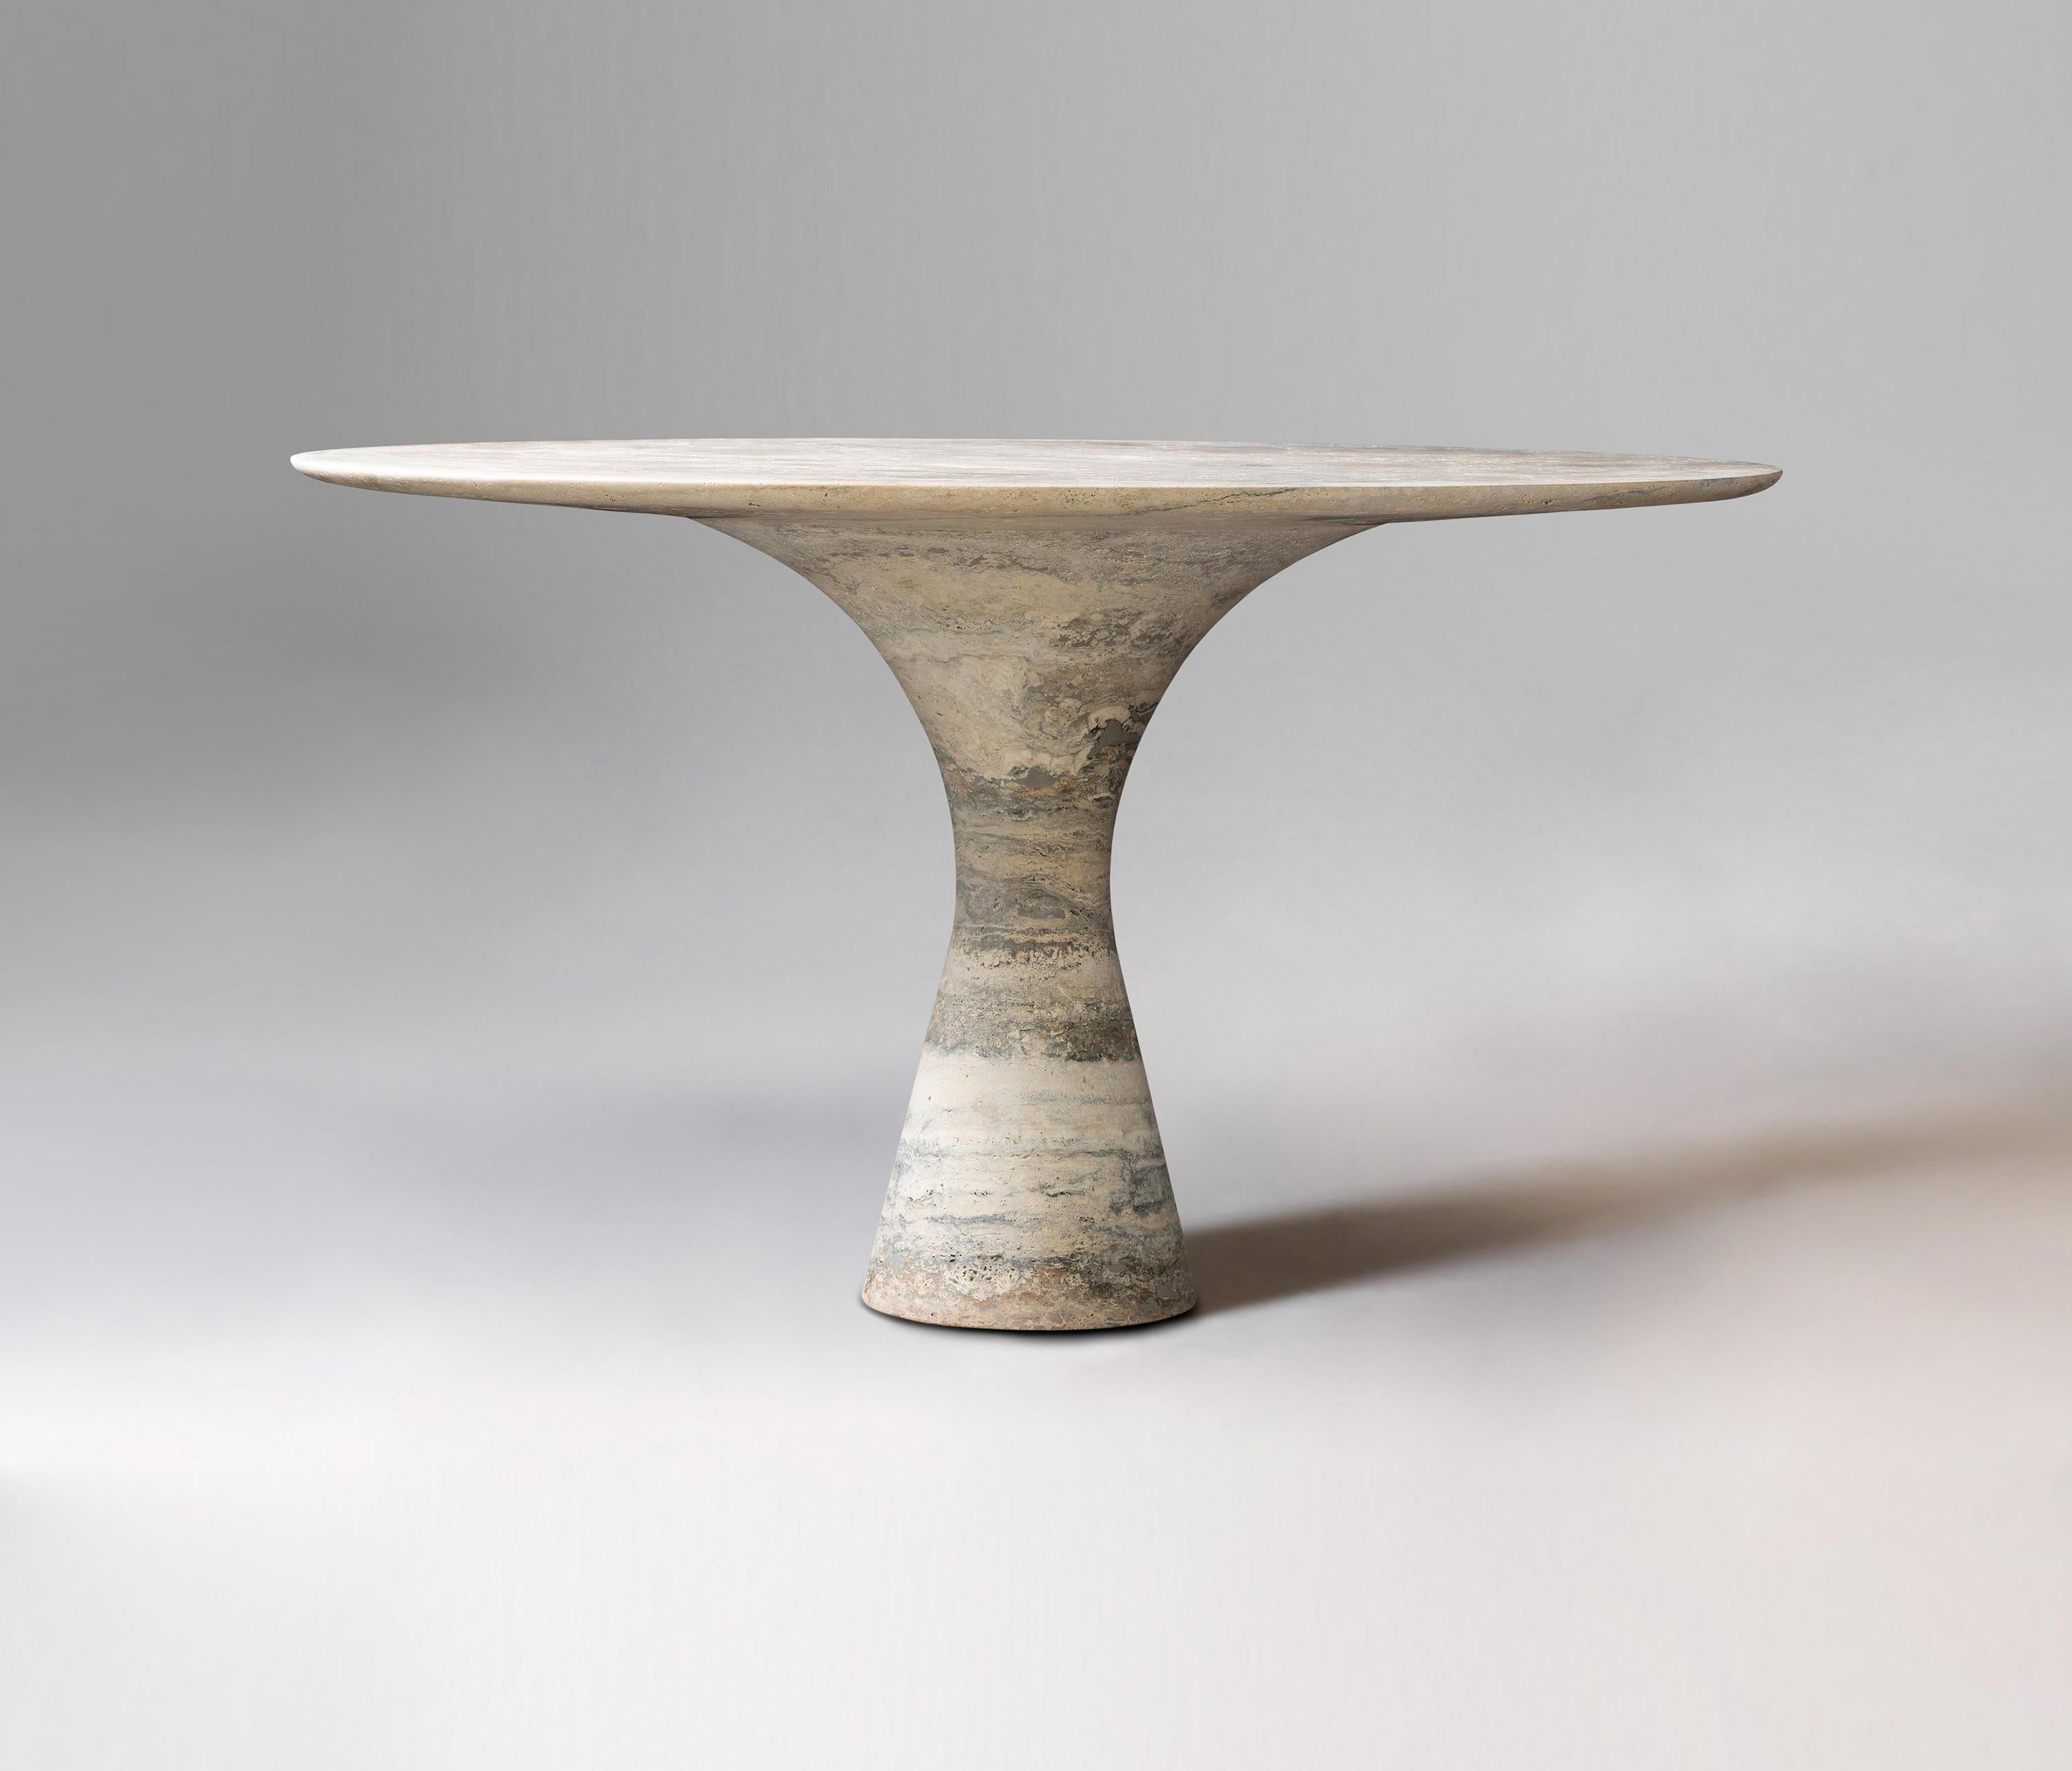 Post-Modern Travertino Silver Refined Contemporary Marble Dining Table 160/75